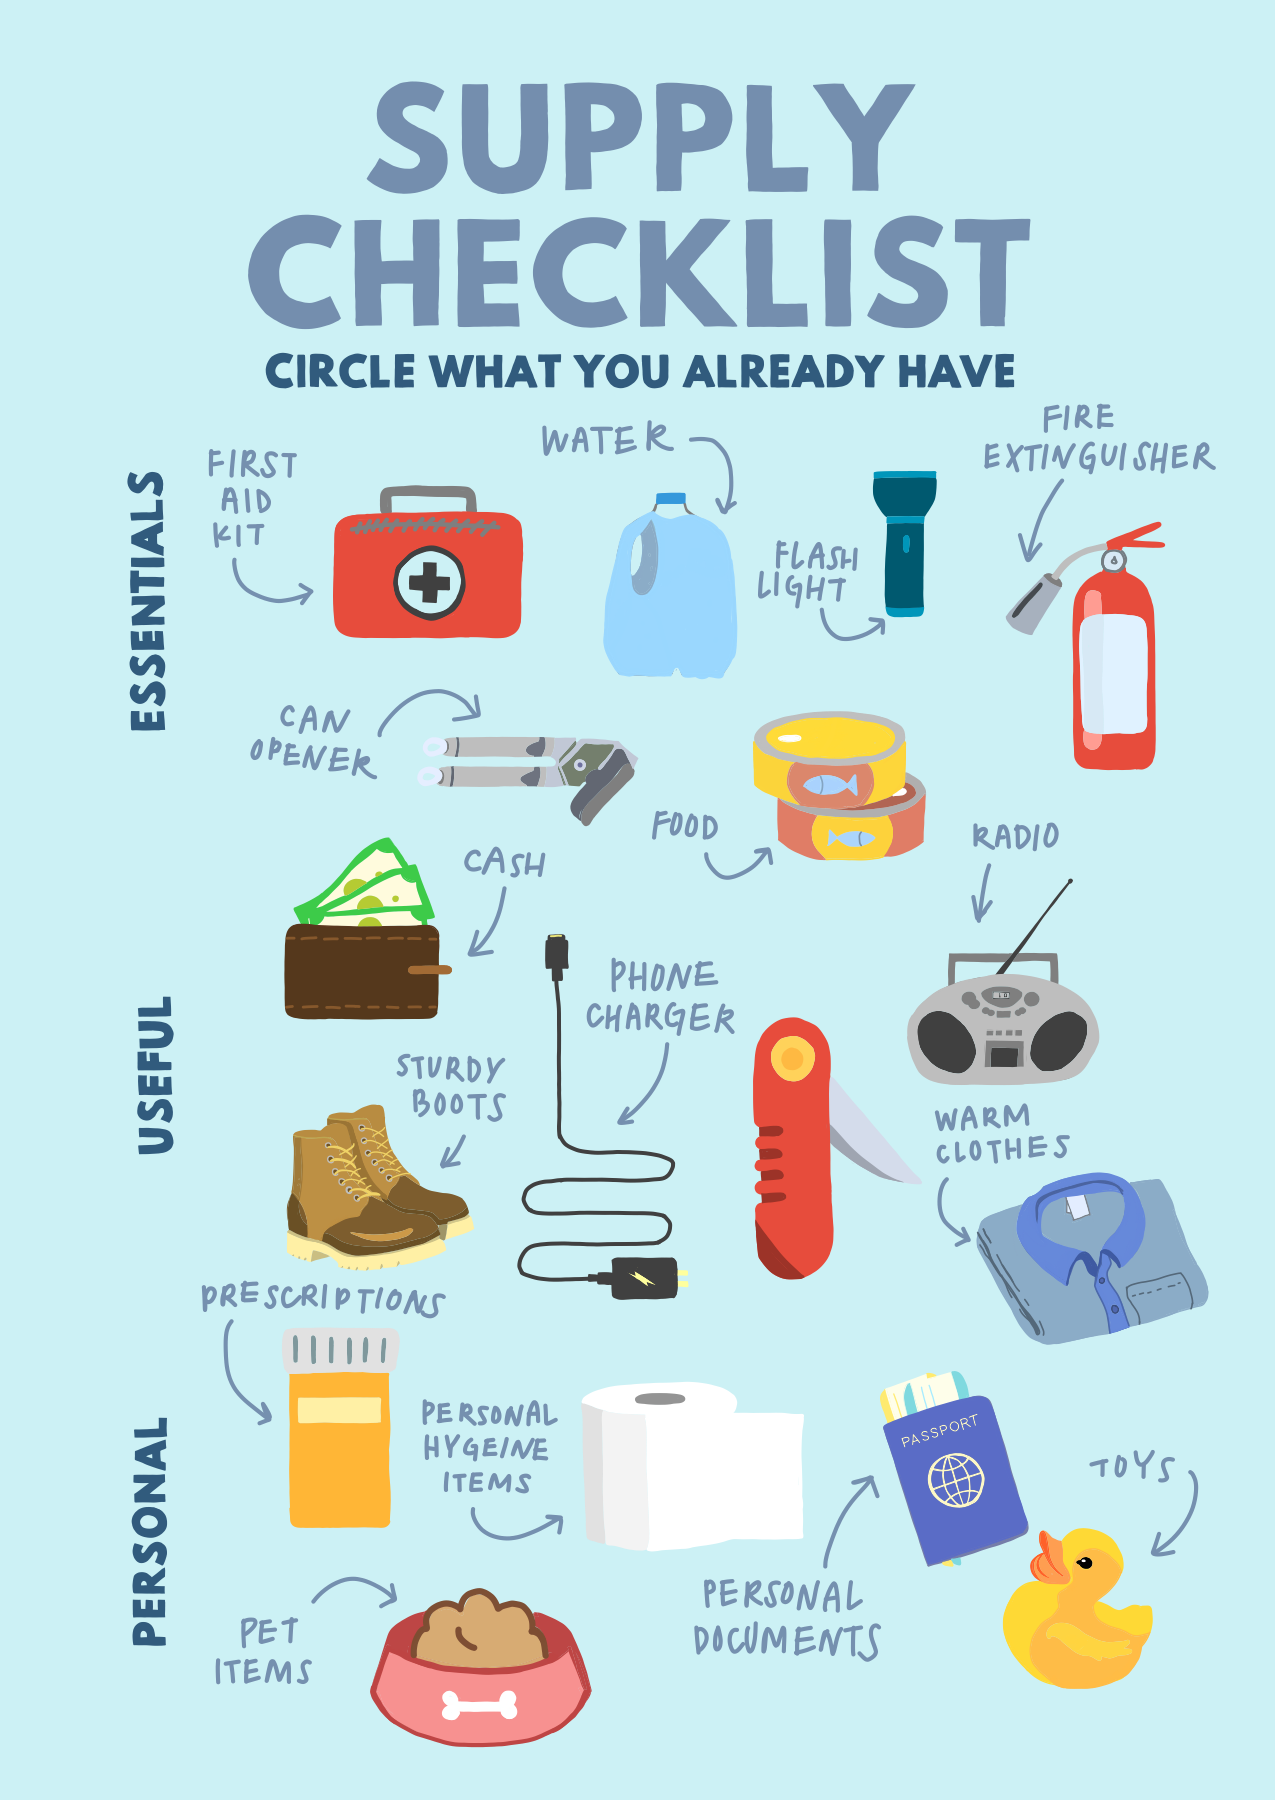 What essentials to pack in an emergency disaster go-bag